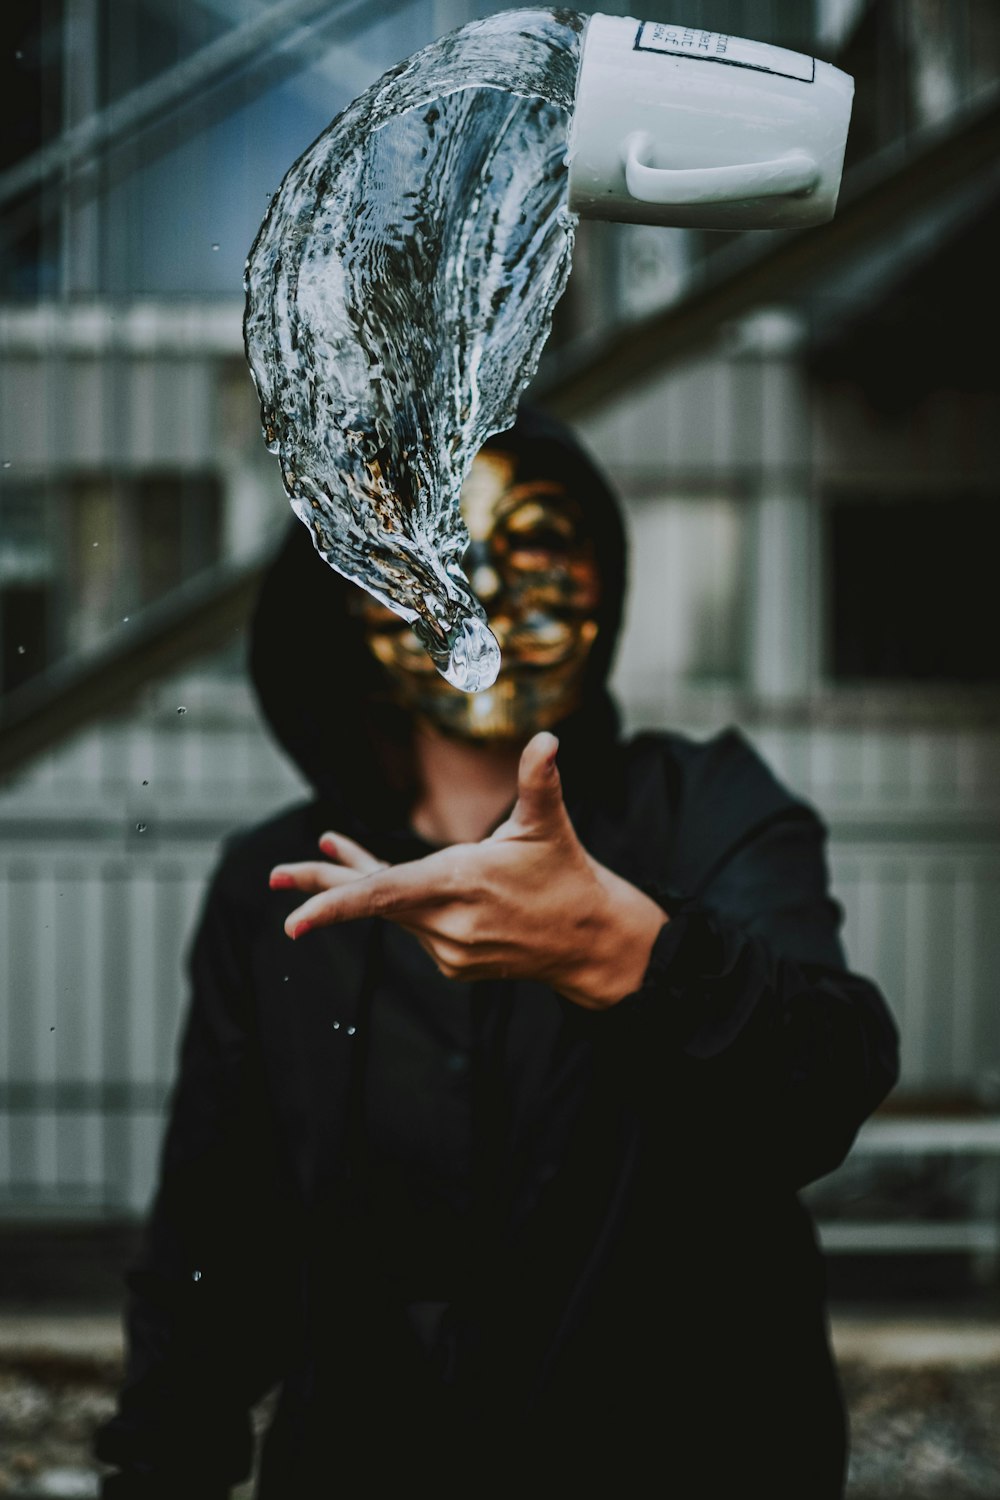 man wearing gold-colored mask and black hooded jacket tossed white ceramic mug with water